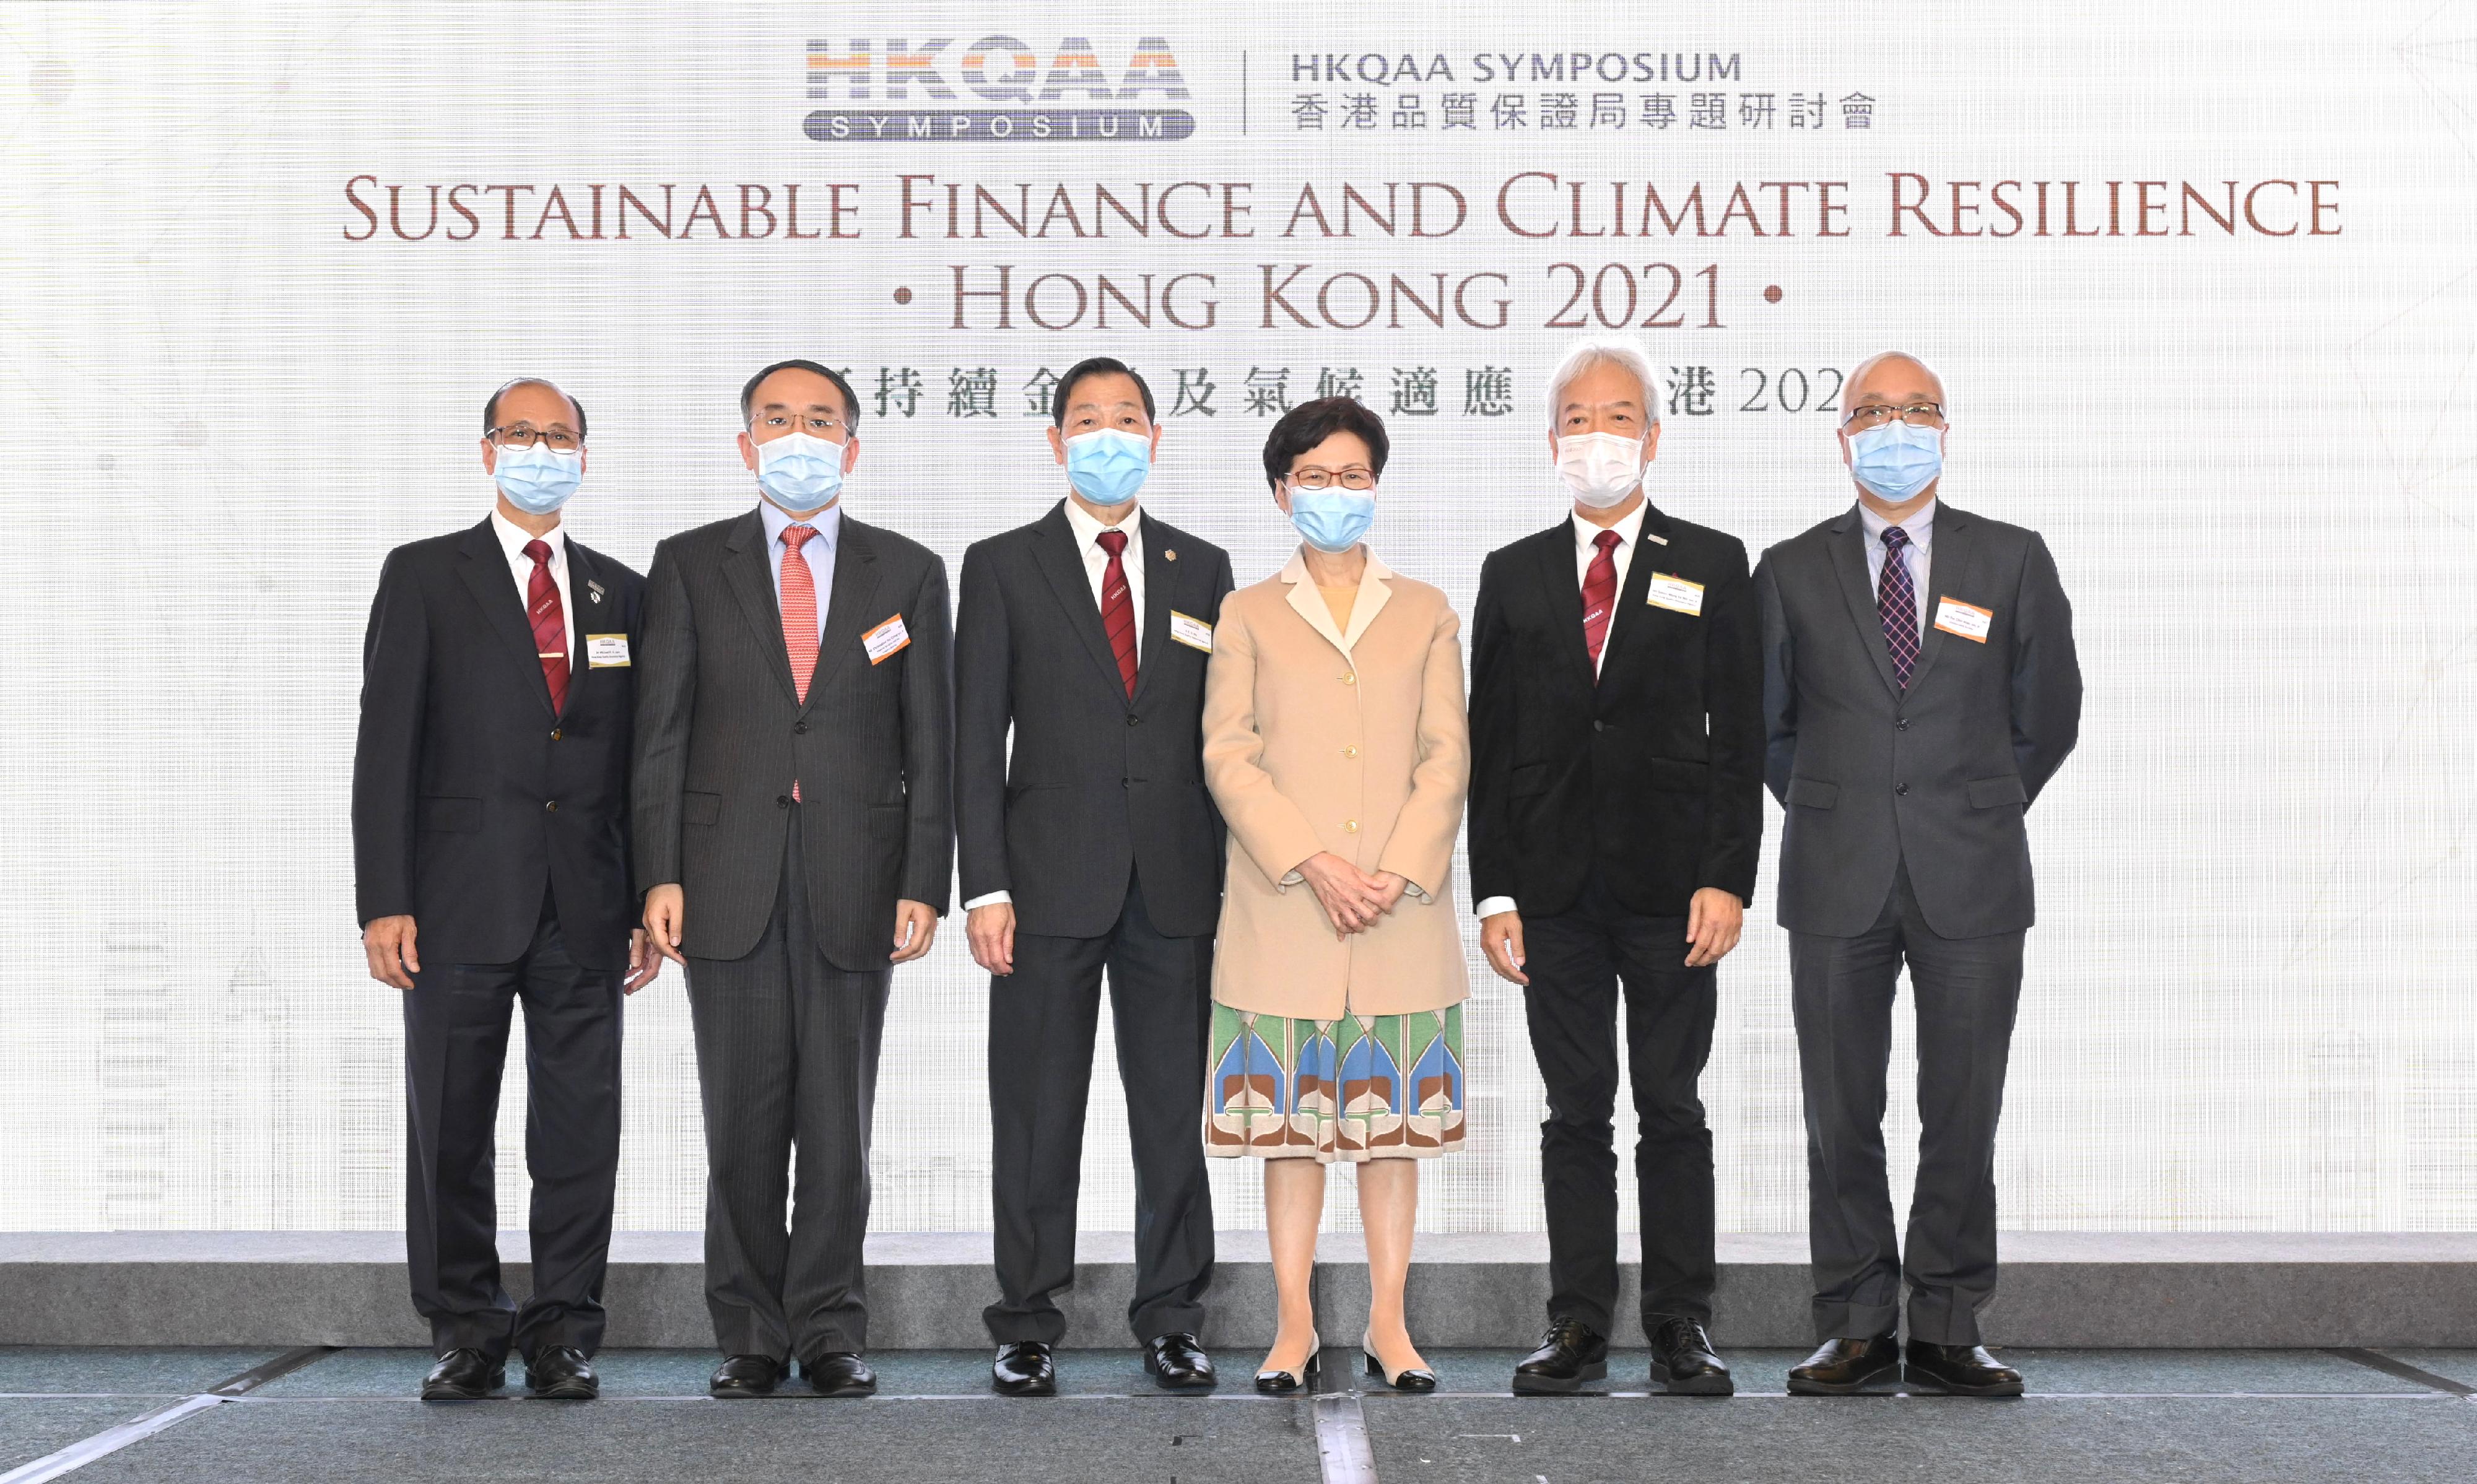 The Chief Executive, Mrs Carrie Lam, attended the HKQAA Symposium - Sustainable Finance and Climate Resilience • Hong Kong 2021 today (December 3). Photo shows (from left) the Chief Executive Officer of the Hong Kong Quality Assurance Agency (HKQAA), Dr Michael Lam; the Secretary for Financial Services and the Treasury, Mr Christopher Hui; the Chairman of the HKQAA, Mr Ho Chi-shing; Mrs Lam; the Deputy Chairman of the HKQAA, Mr Simon Wong; and the Under Secretary for the Environment, Mr Tse Chin-wan.